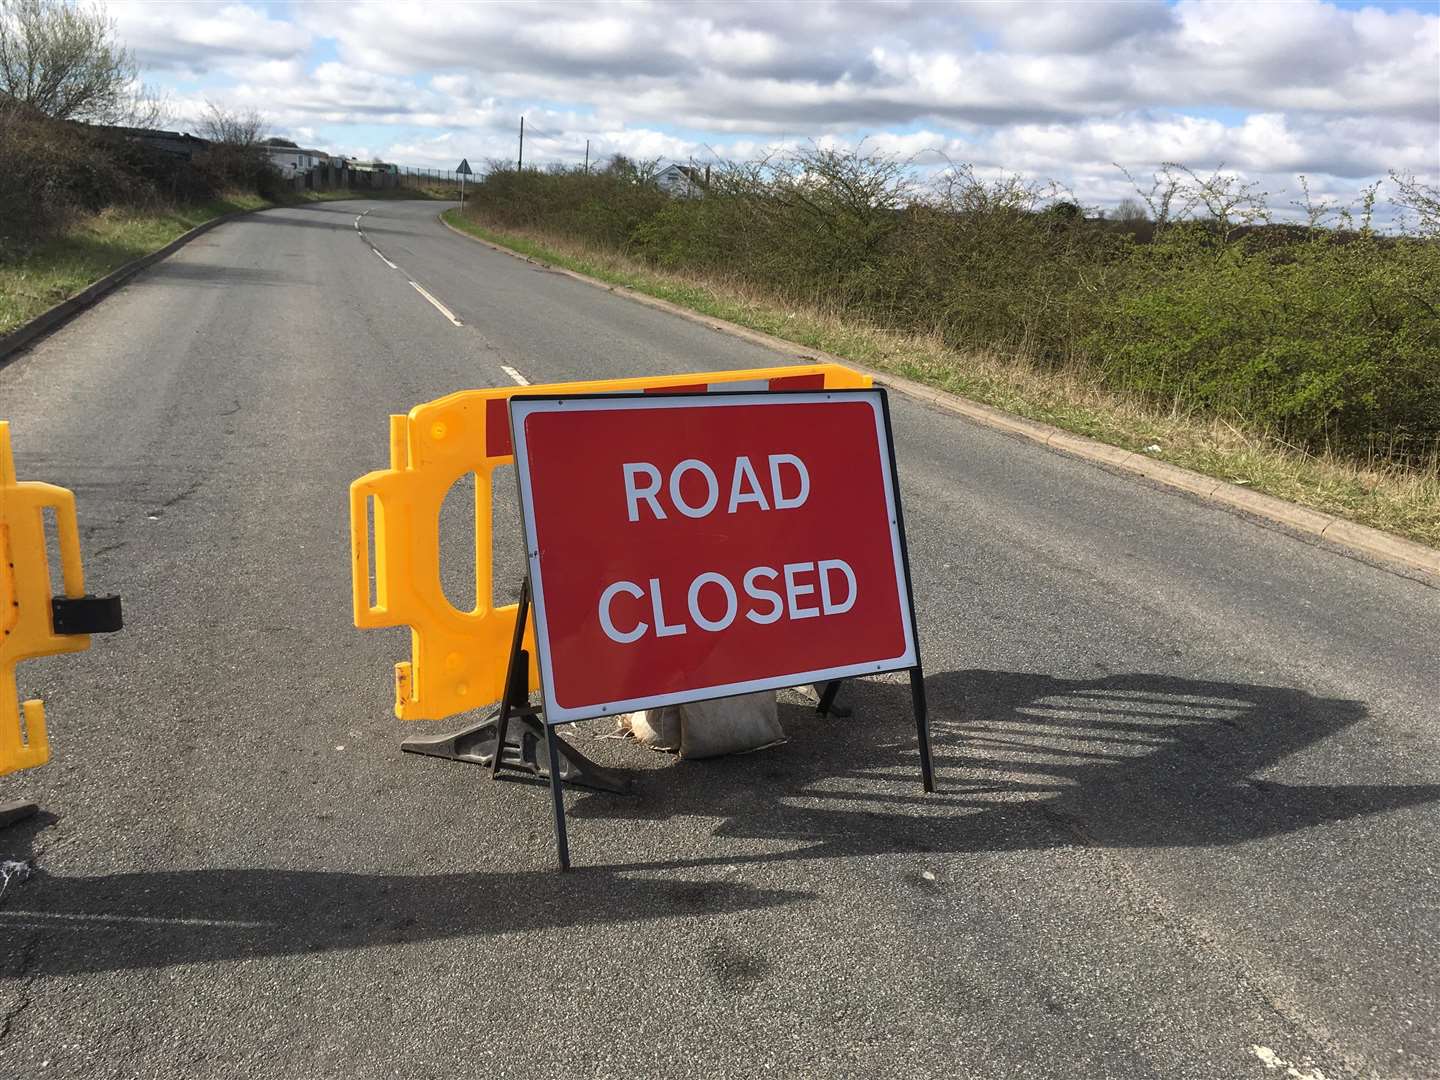 Thornden Wood Road was closed in March for pothole repairs